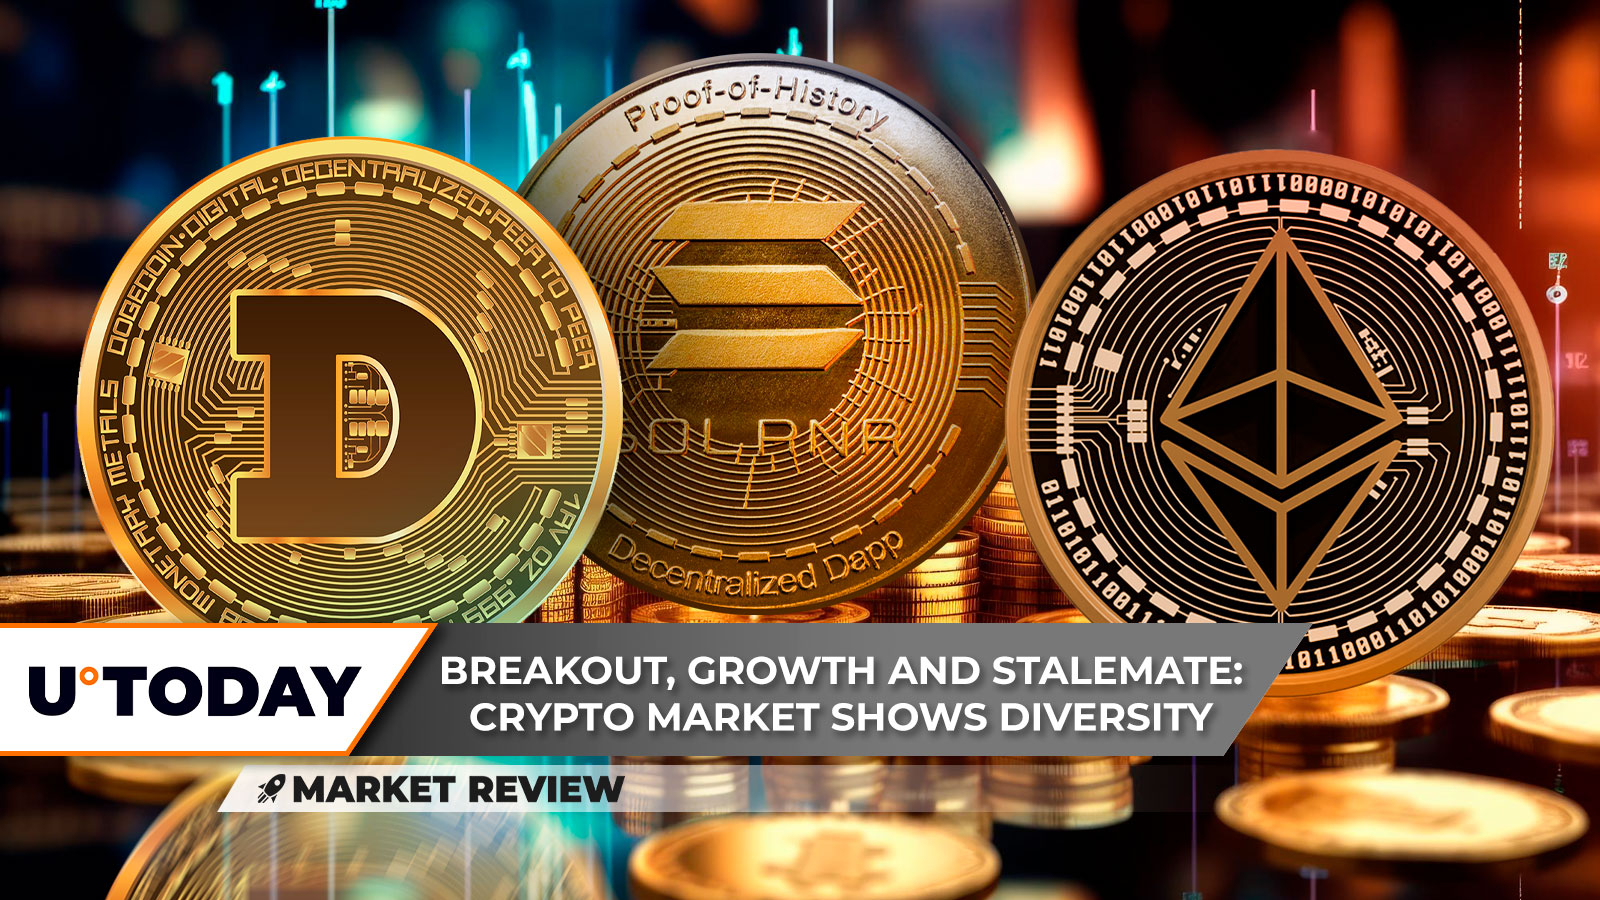 Dogecoin (DOGE) Breakout Occurs, What's Next? Solana (SOL) Stays Dominant, Will Ethereum (ETH) Survive Unseen Stalemate?